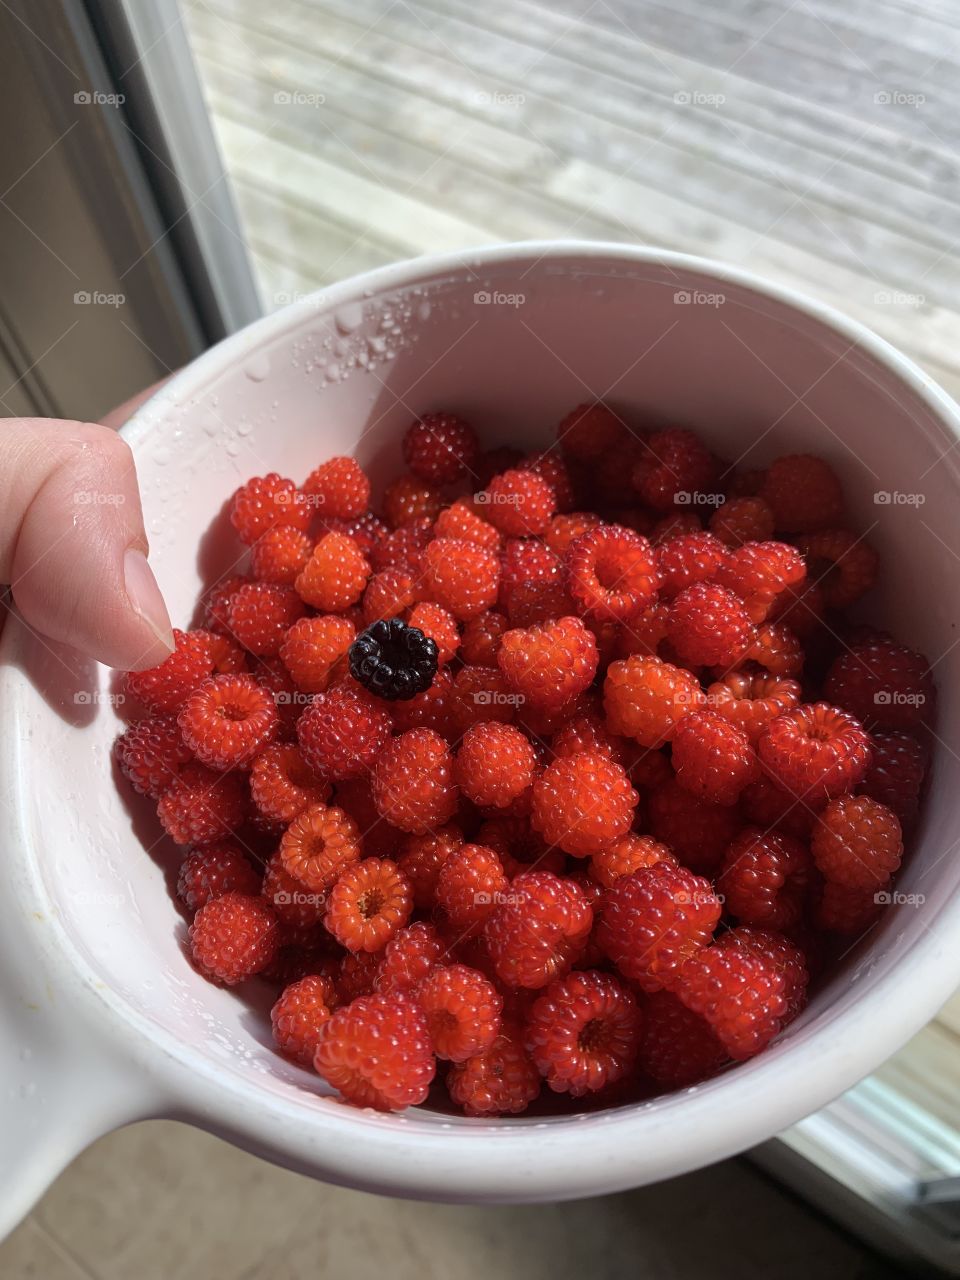 Wild Wineberries picked from an overgrown area on the edge of our backyard. Delicious, sweet, tart!